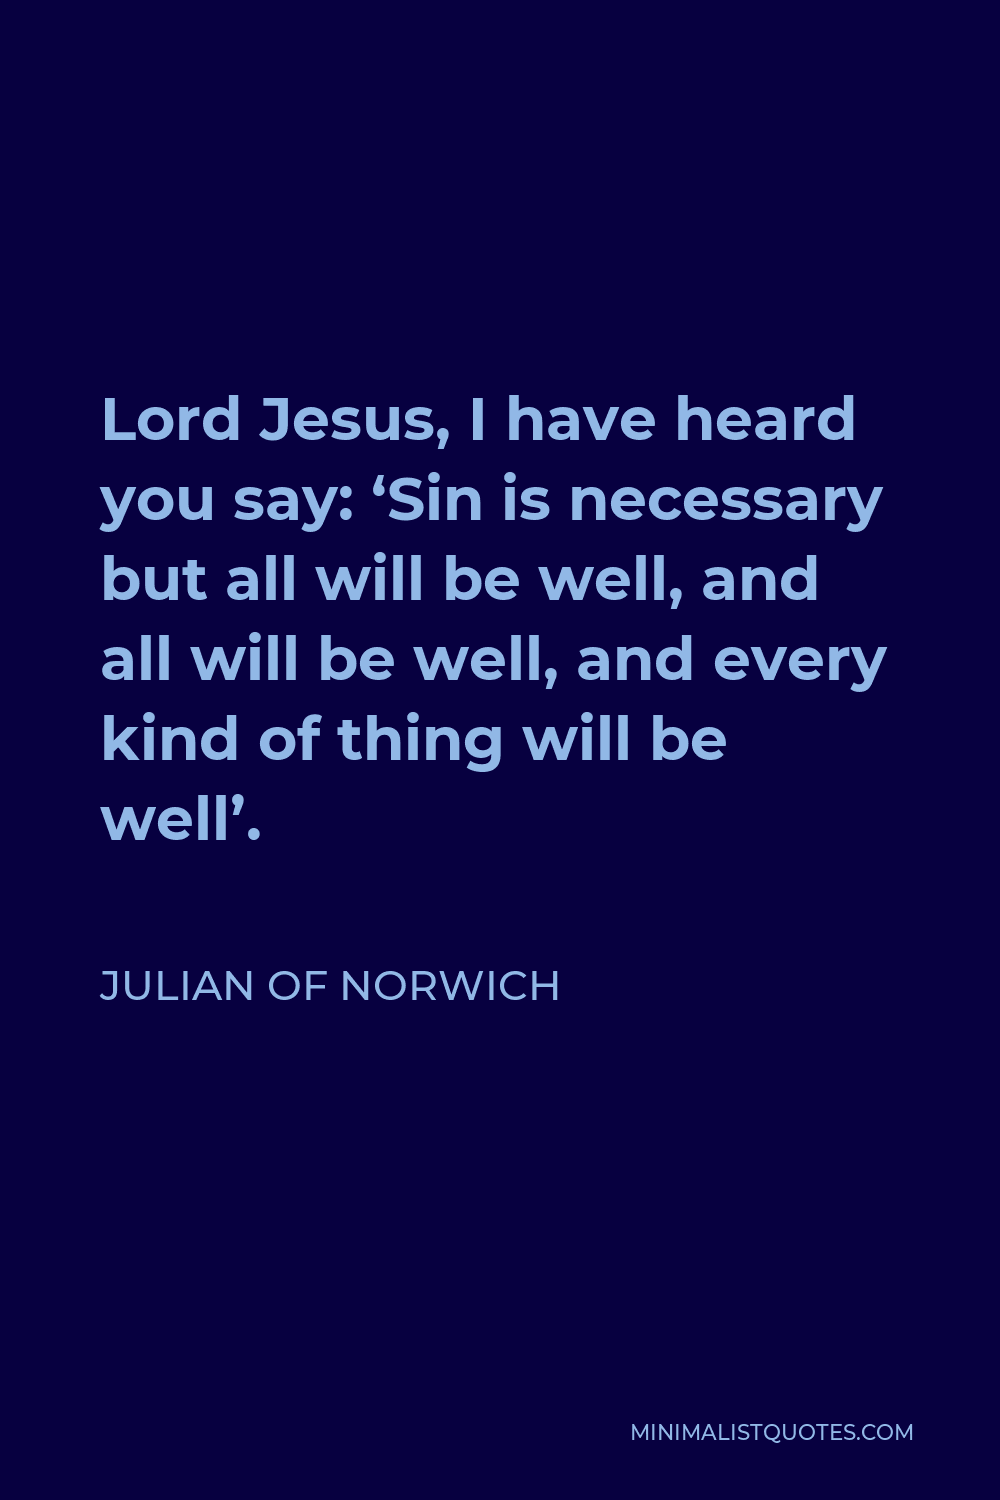 Julian of Norwich Quote - Lord Jesus, I have heard you say: ‘Sin is necessary but all will be well, and all will be well, and every kind of thing will be well’.